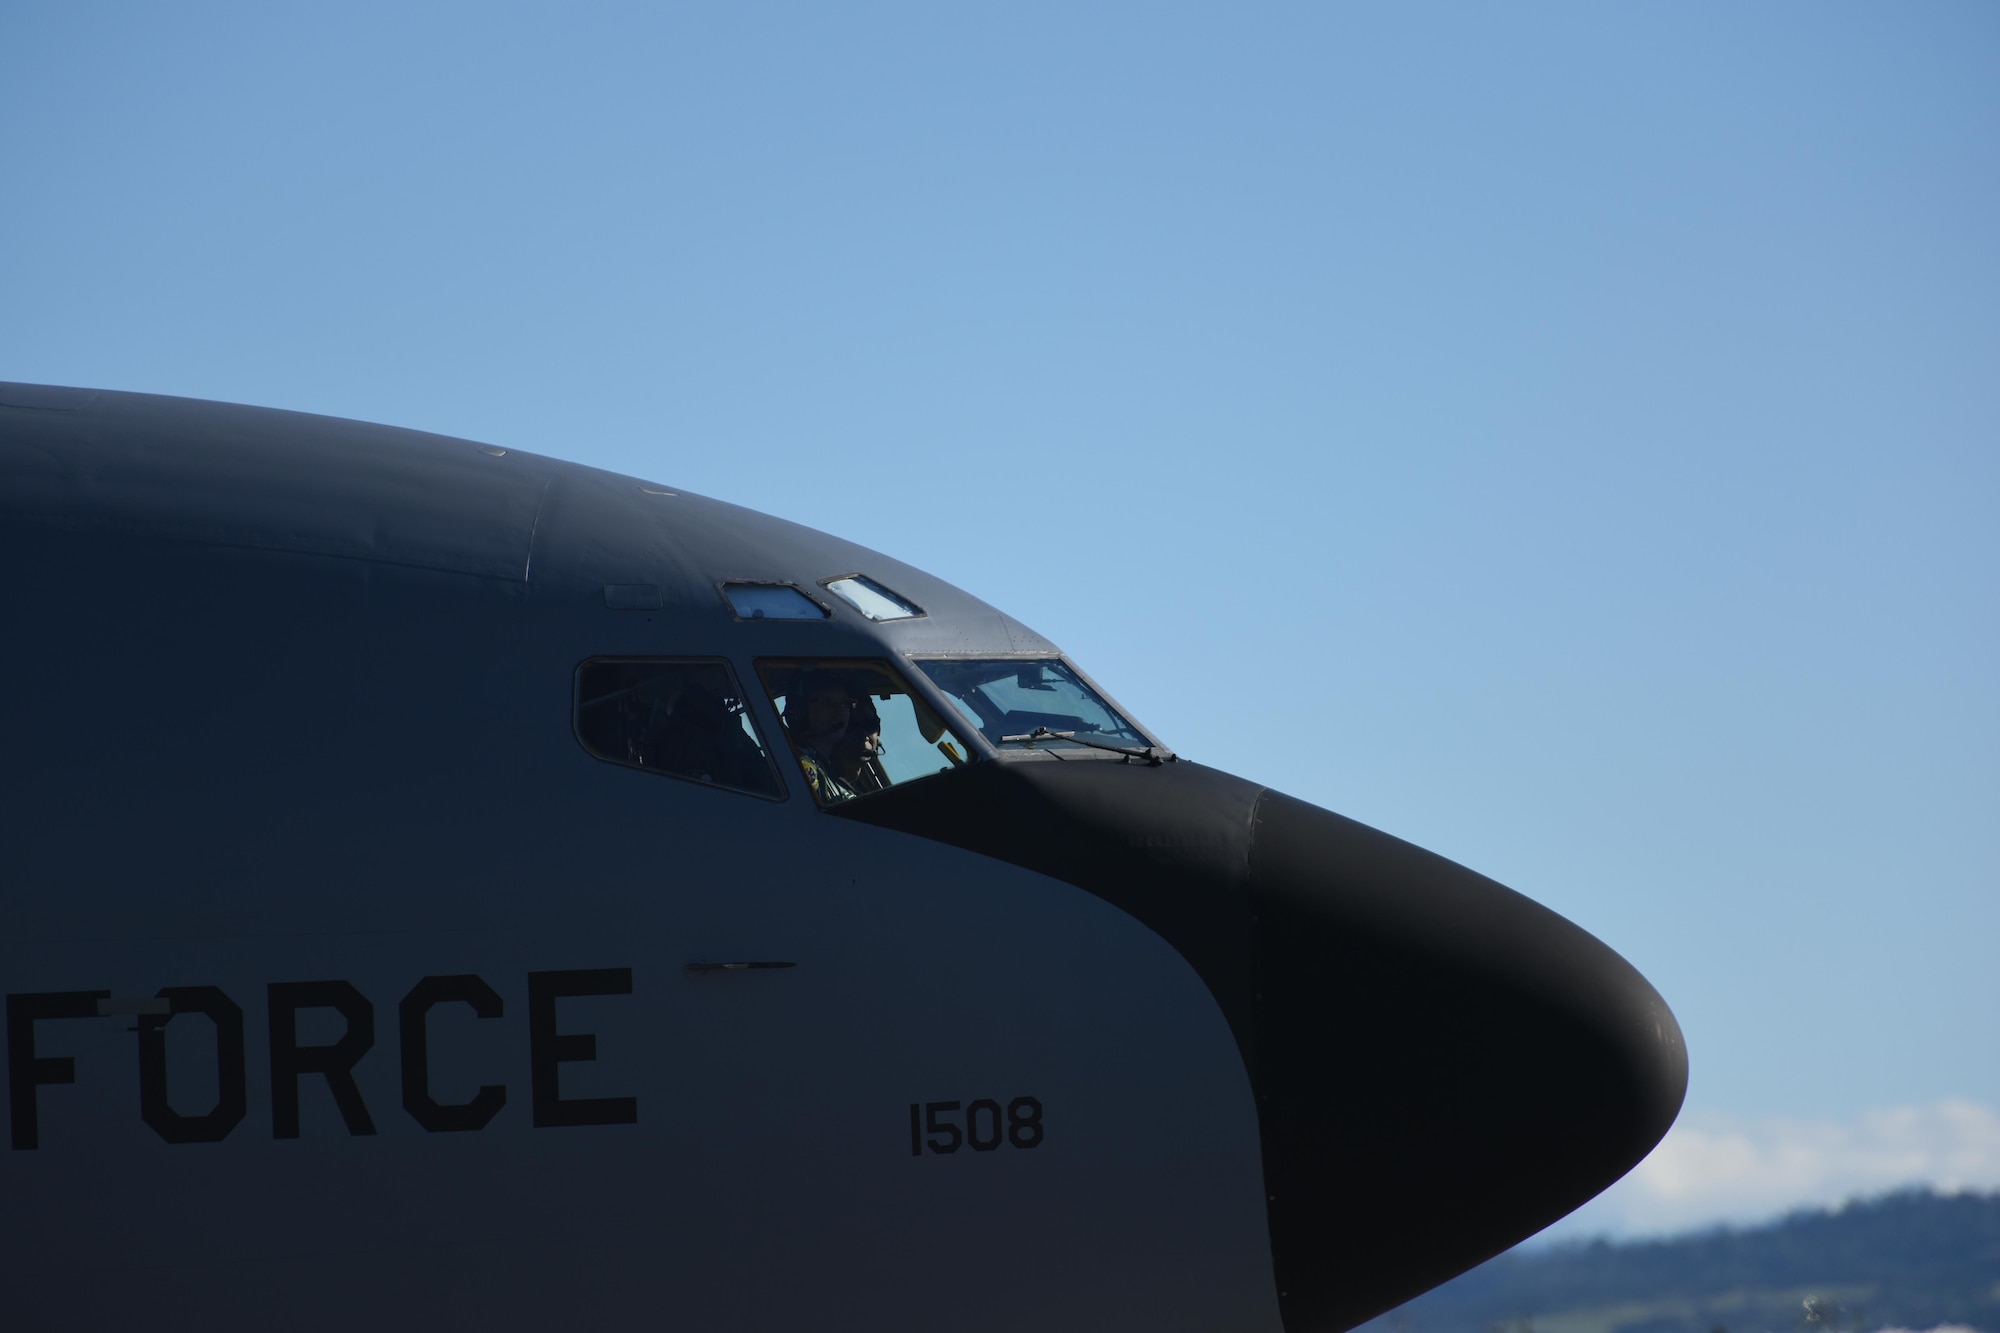 Lt. Col. Scott Meyer, 314th Air Refueling Squadron Director of Operations, taxis a KC-135 Stratotanker down the runway at Beale Air Force Base, California on Feb. 11, 2017 as part of a two-ship formation training sortie. The 314 ARS have to formation train for tactical purposes and the unit training assembly is an opportune time for traditional reserve maintainers and pilots to all train and fly together. (U.S. Air Force photo by Staff Sgt. Brenda Davis).